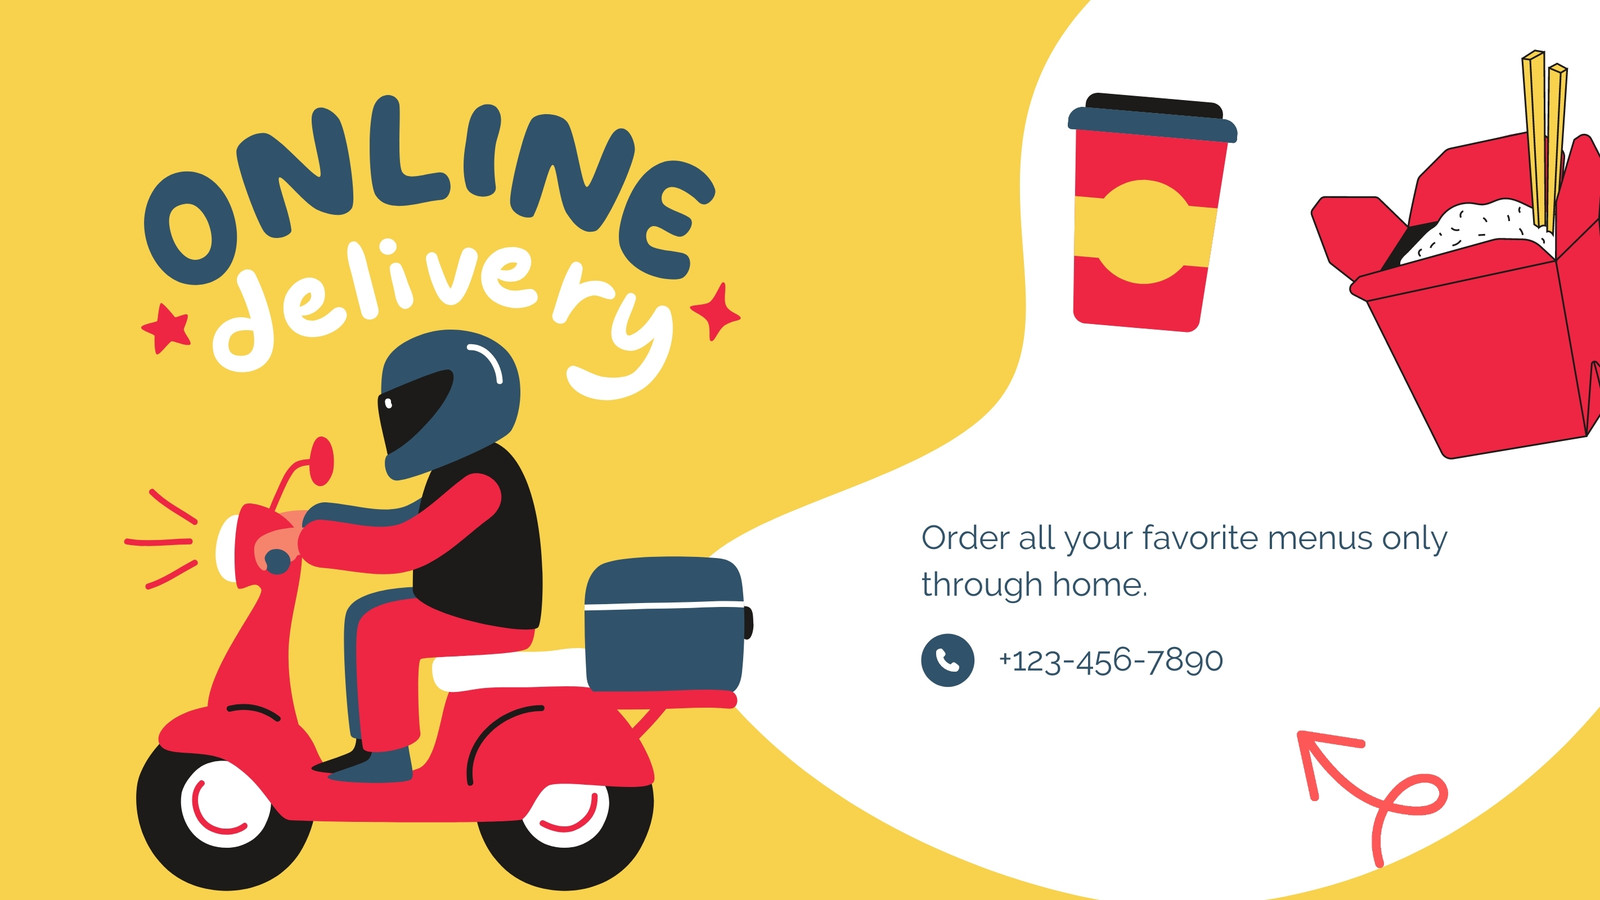 Sbl Food Delivery Services in Shahapur,Mumbai - Best Restaurants in Mumbai  - Justdial